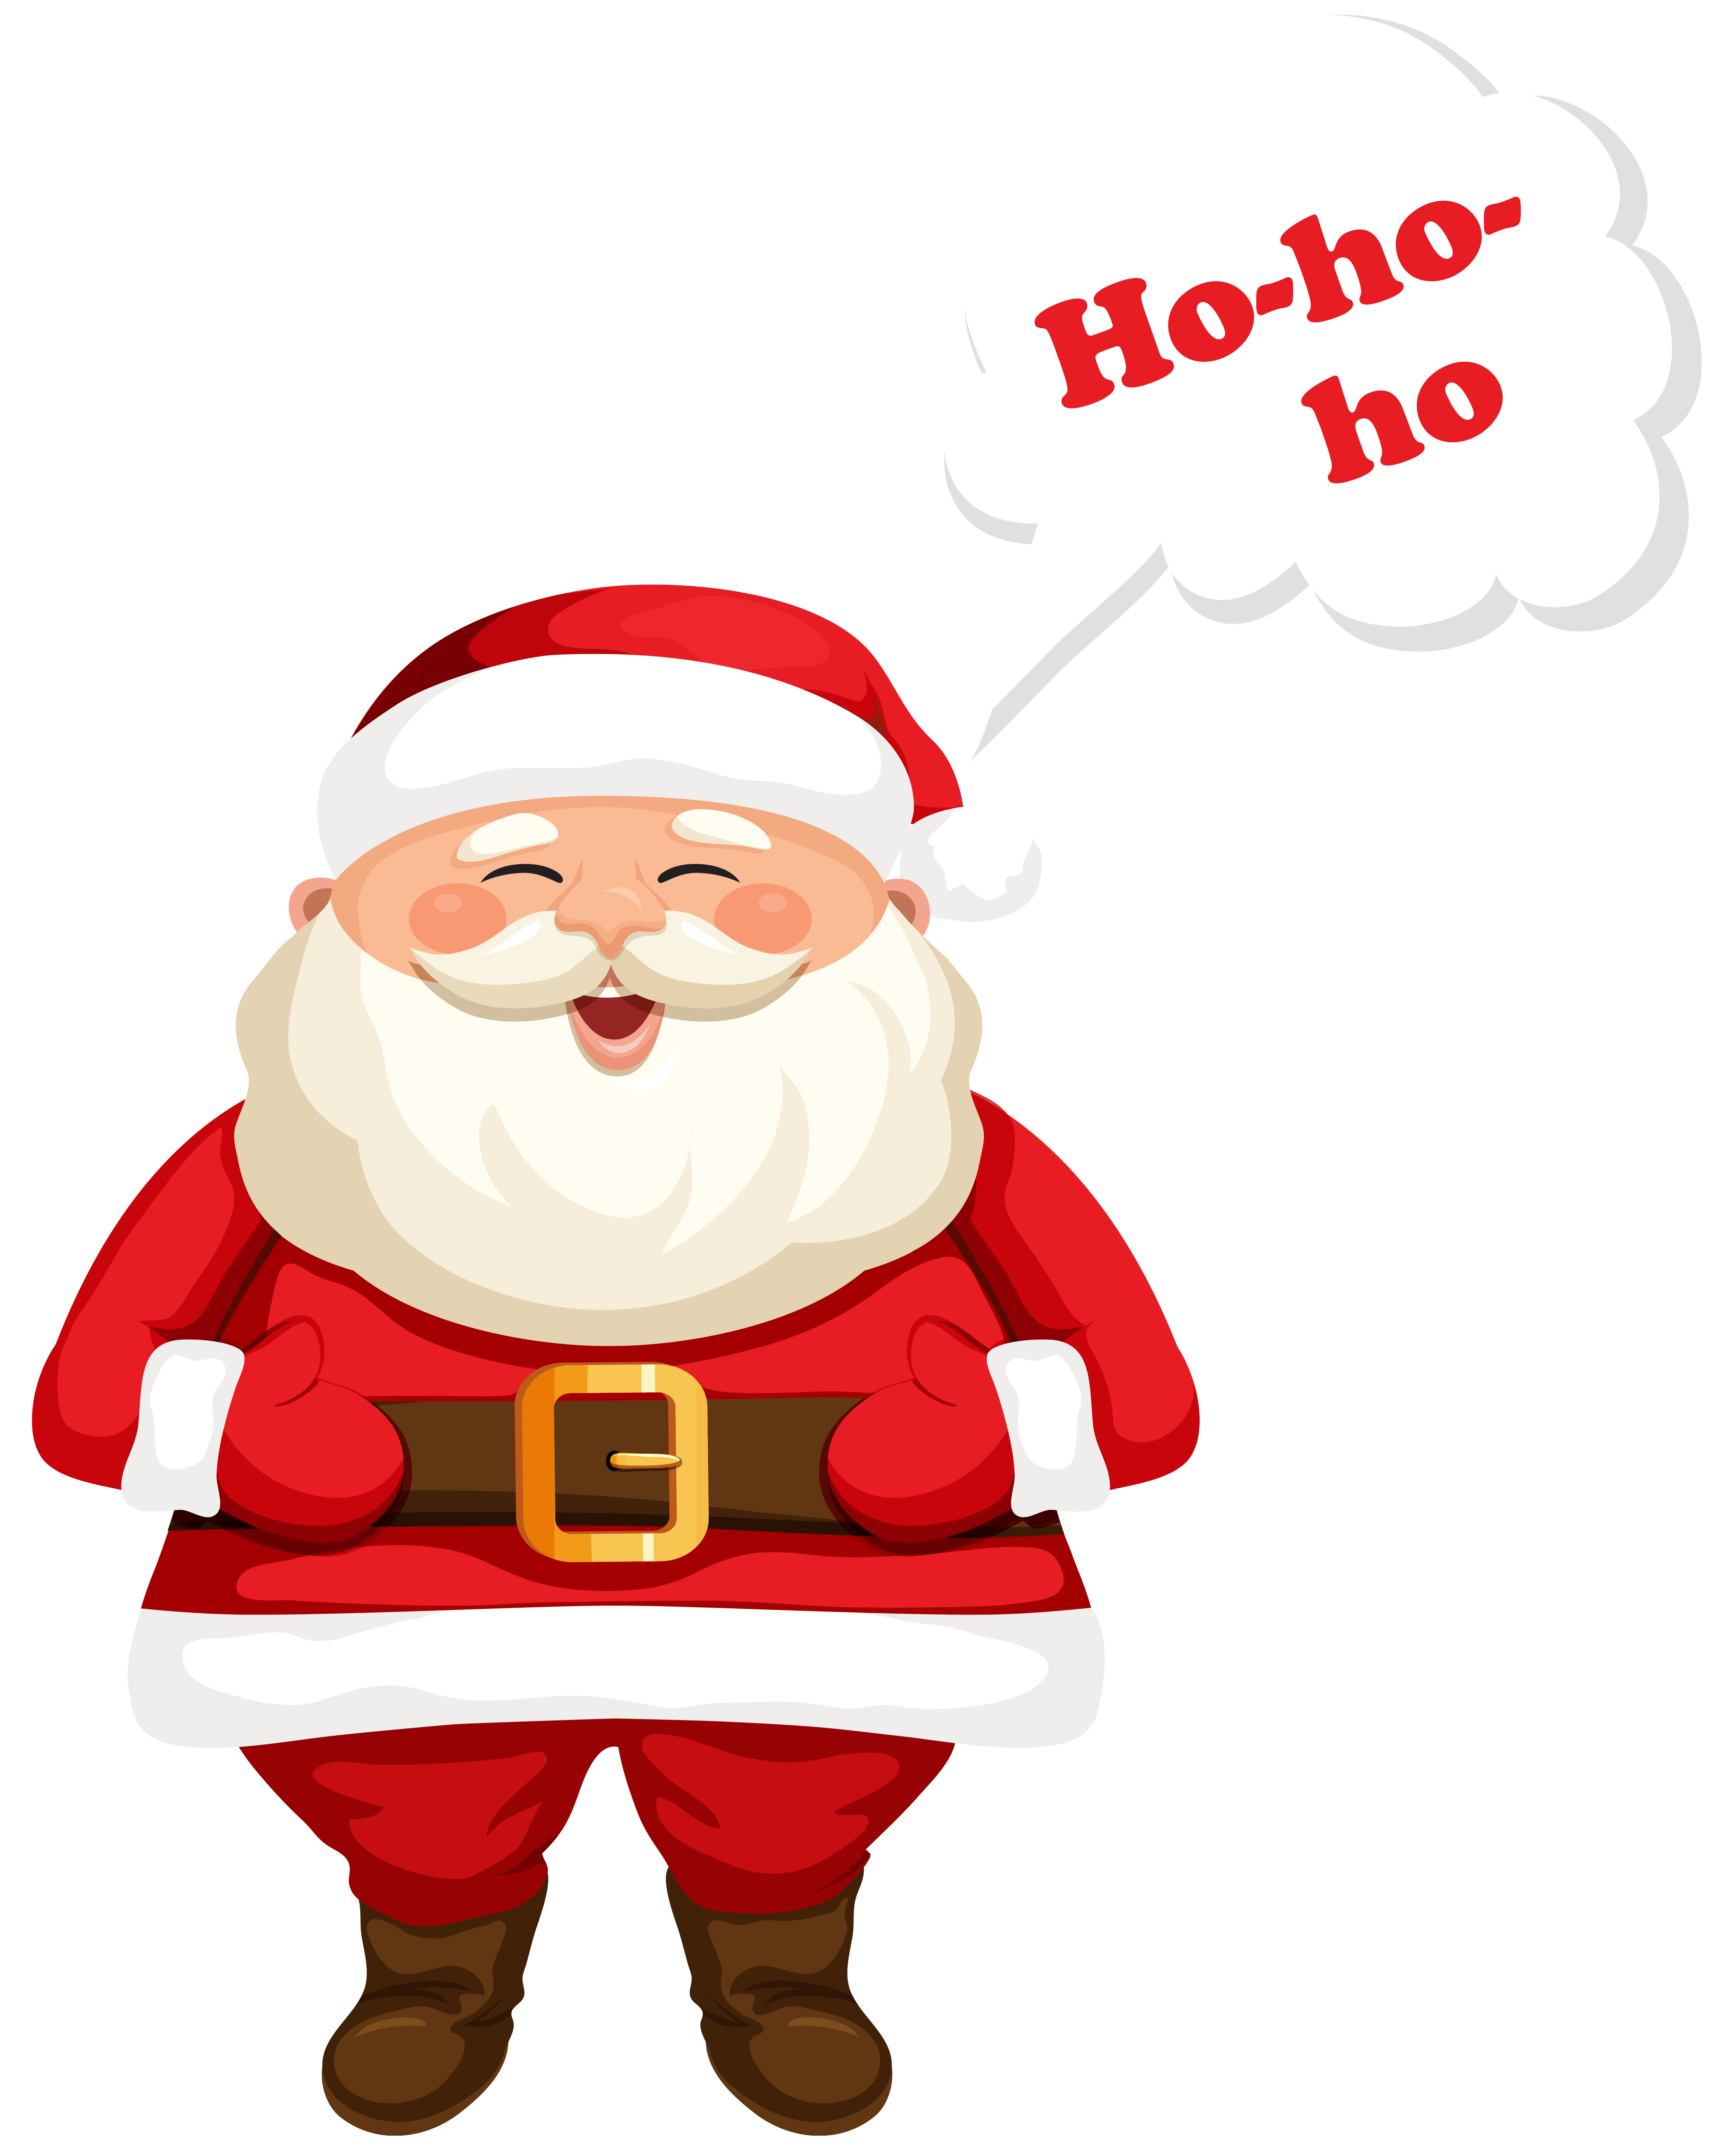 https://gallery.yopriceville.com/var/albums/Free-Clipart-Pictures/Christmas-PNG/Santa_Claus_Ho-Ho-Ho_PNG_Clipart_Image.png?m=1442631301